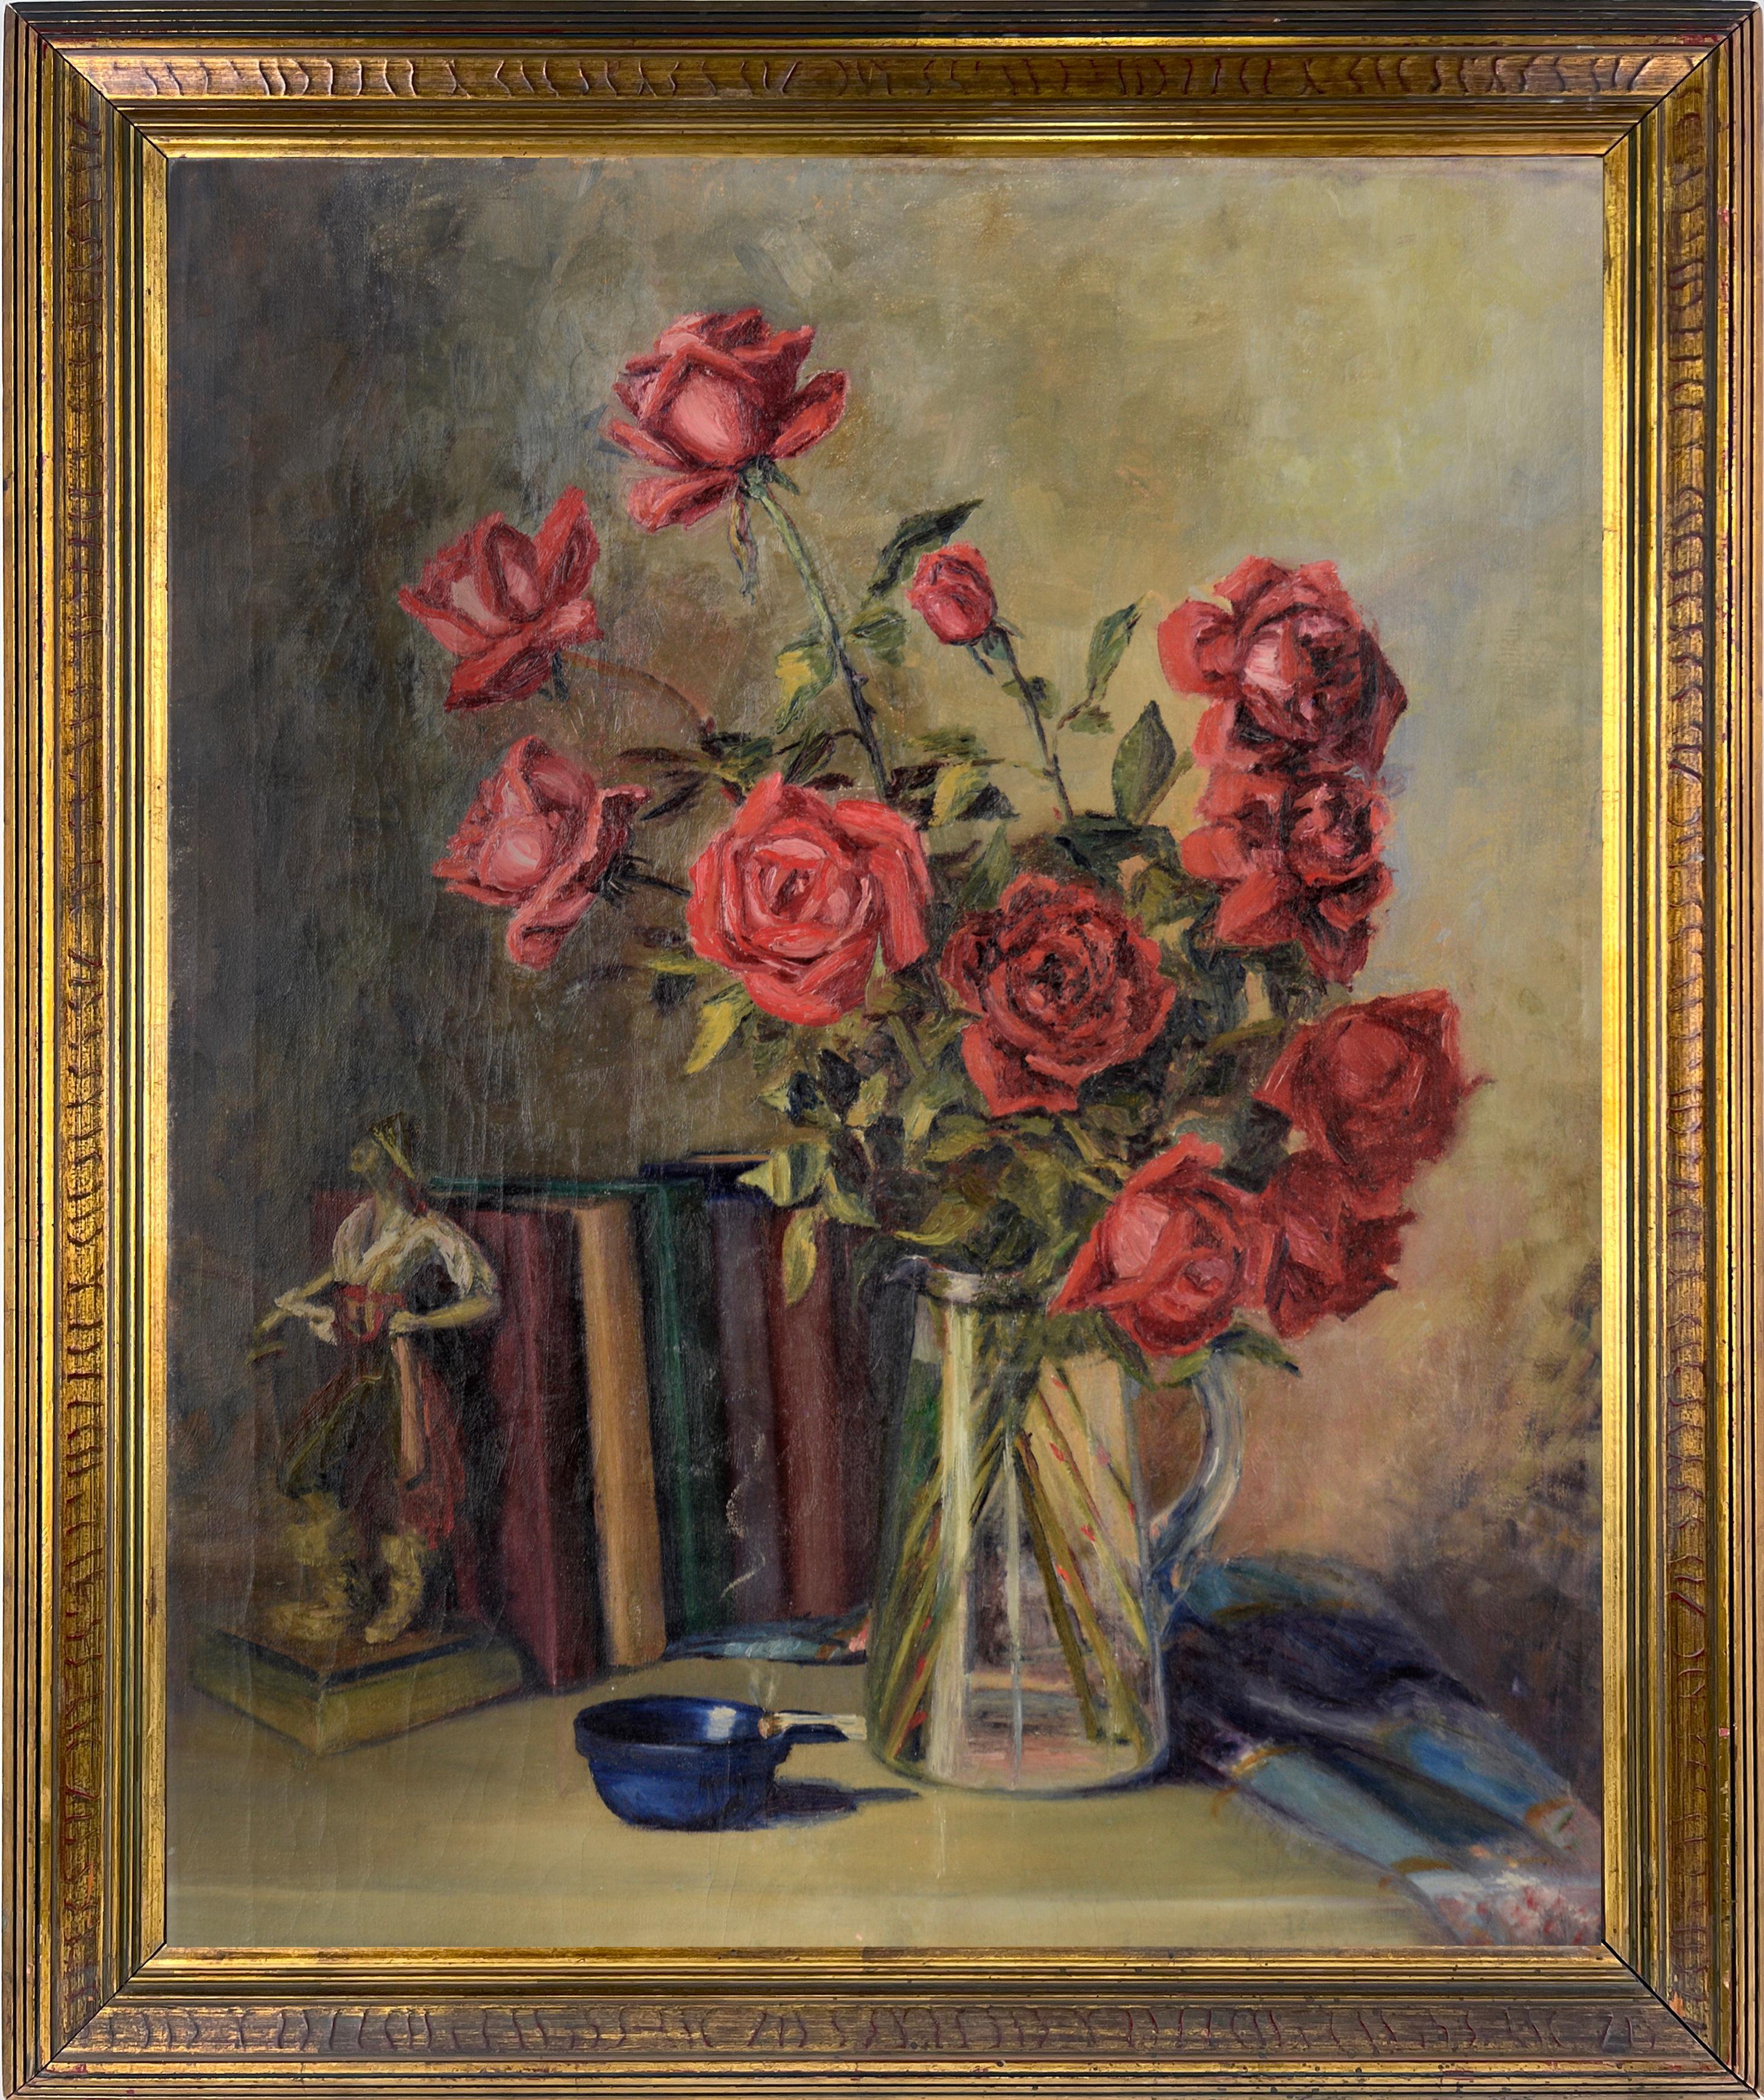 Willa Kay Fall  Still-Life Painting - The Pirates of Penzance - Roses and Books Still Life by Willie Kay Fall - Texas 